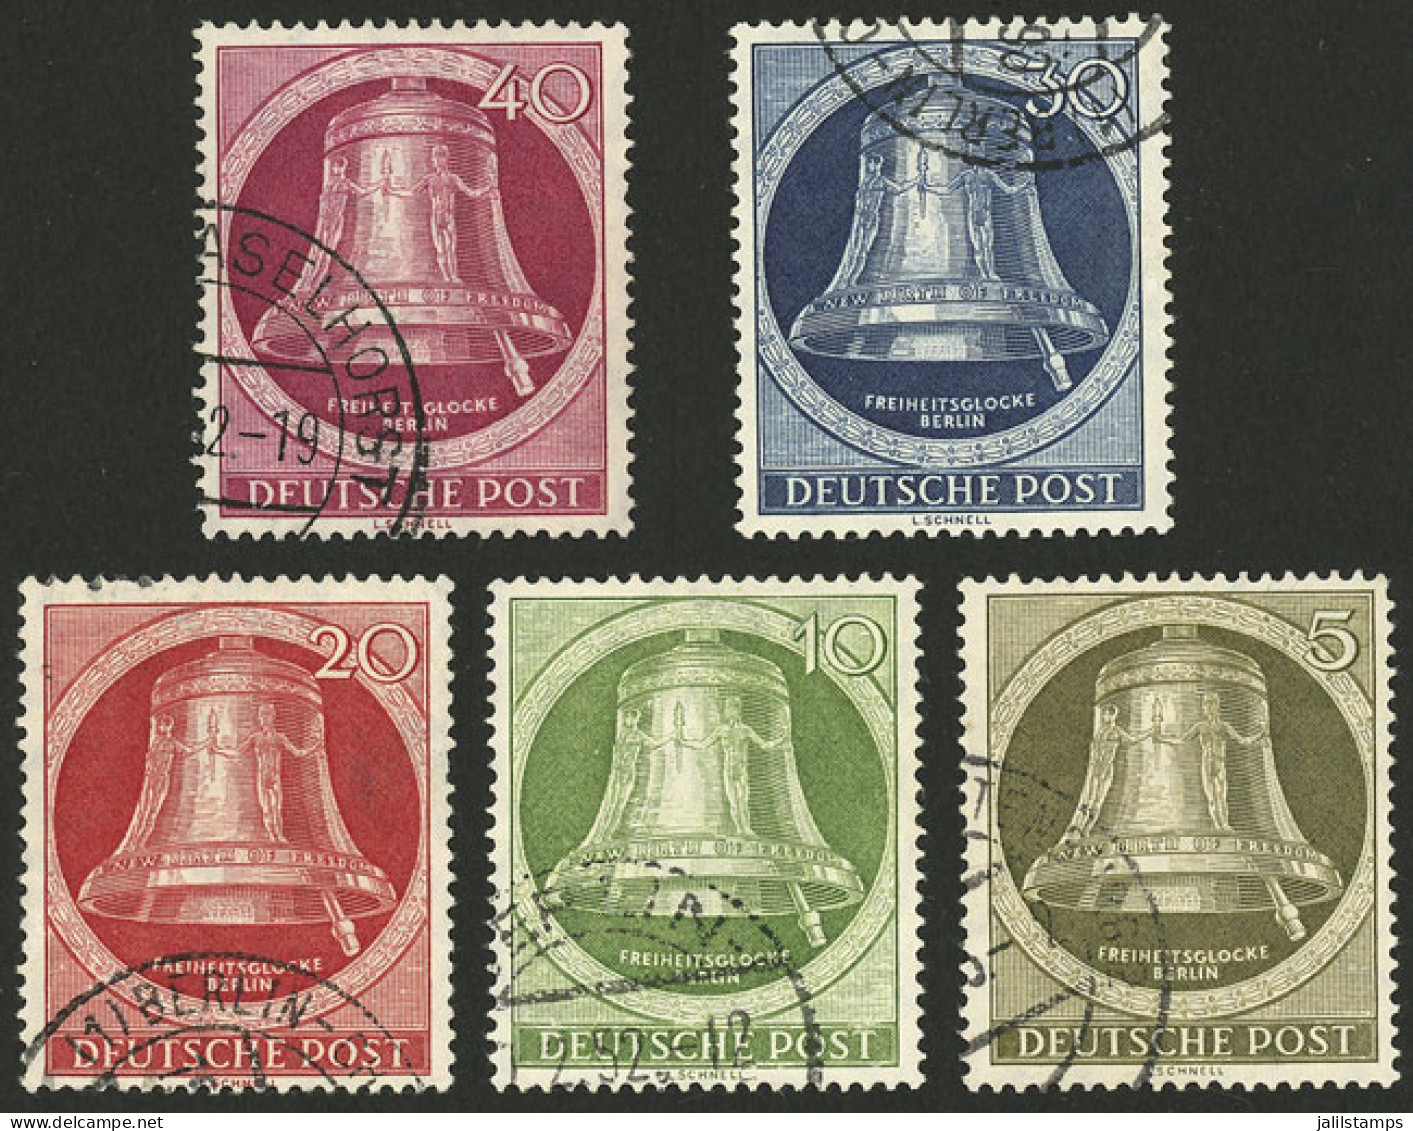 WEST GERMANY - BERLIN: Yvert 68/72, 1952 Bell With Clapper At Right, Set Of 5 Used Values, VF Quality! - Usati